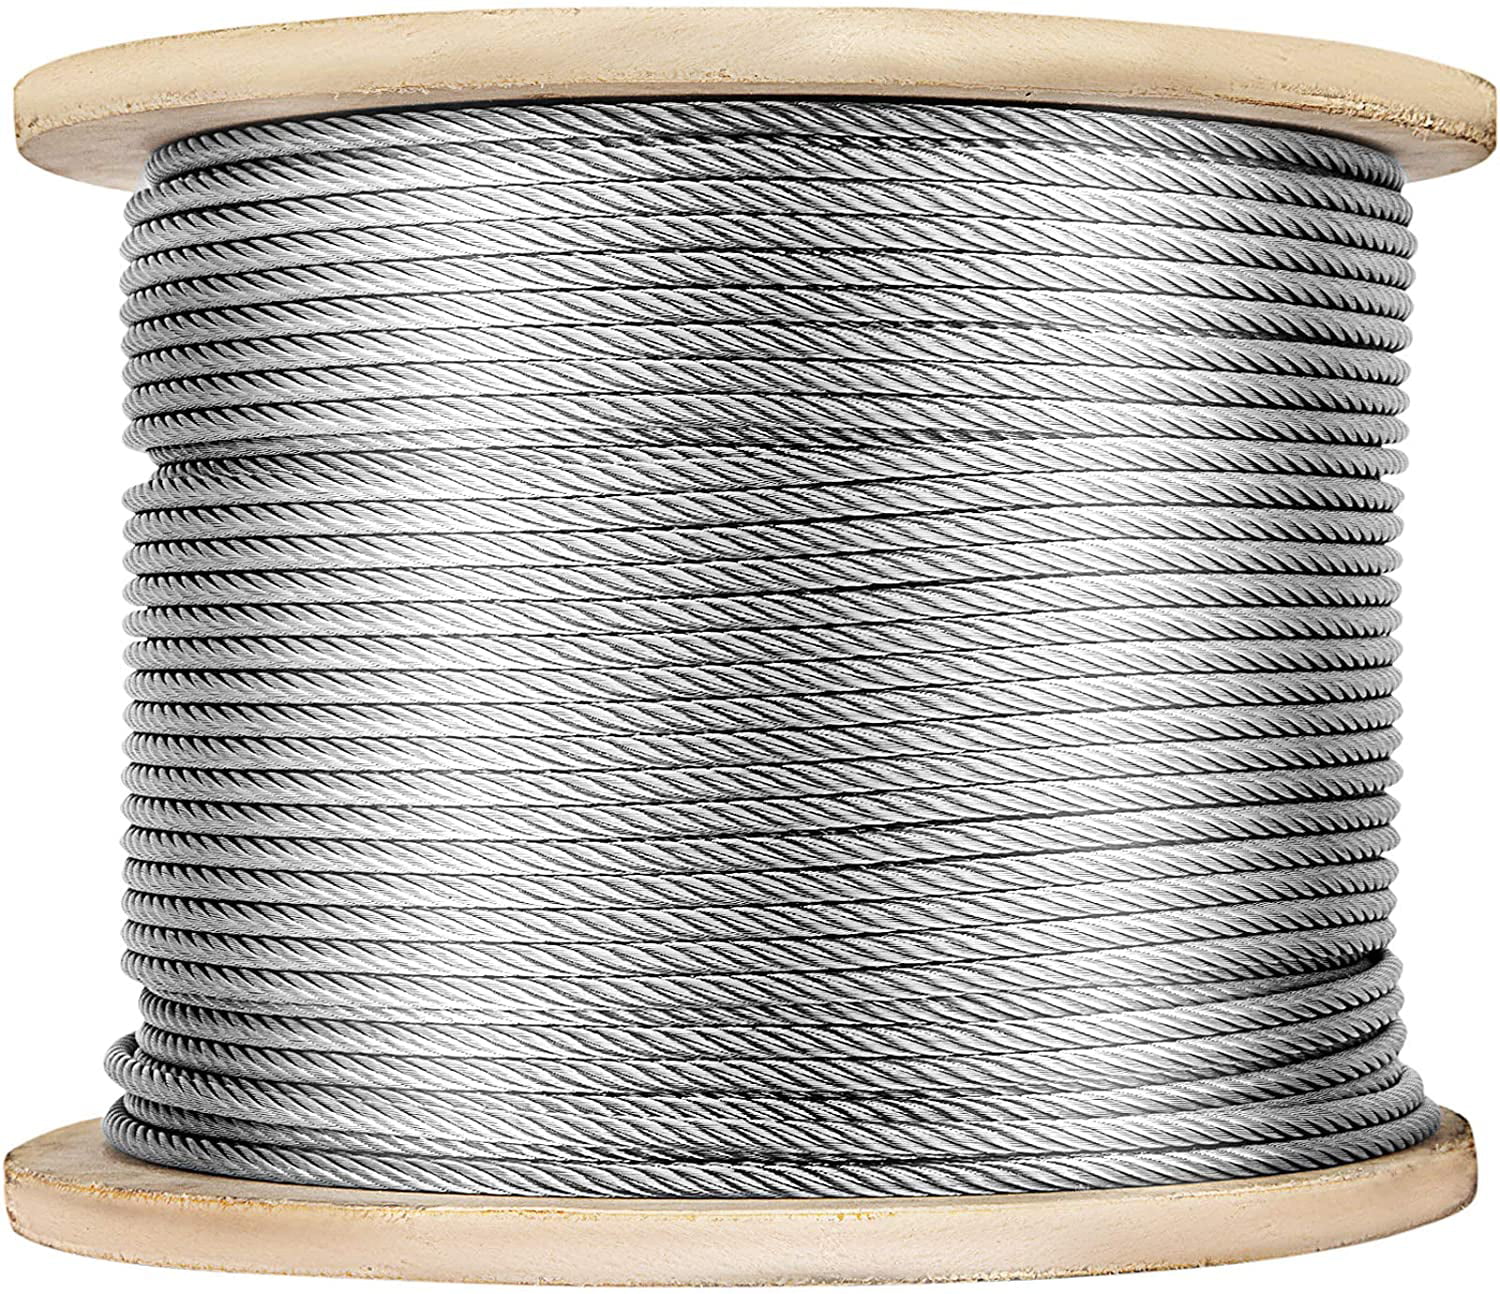 Cable Railing T316 Stainless Steel Wire Rope Cable Strand 1/8" 800 ft 1x19 